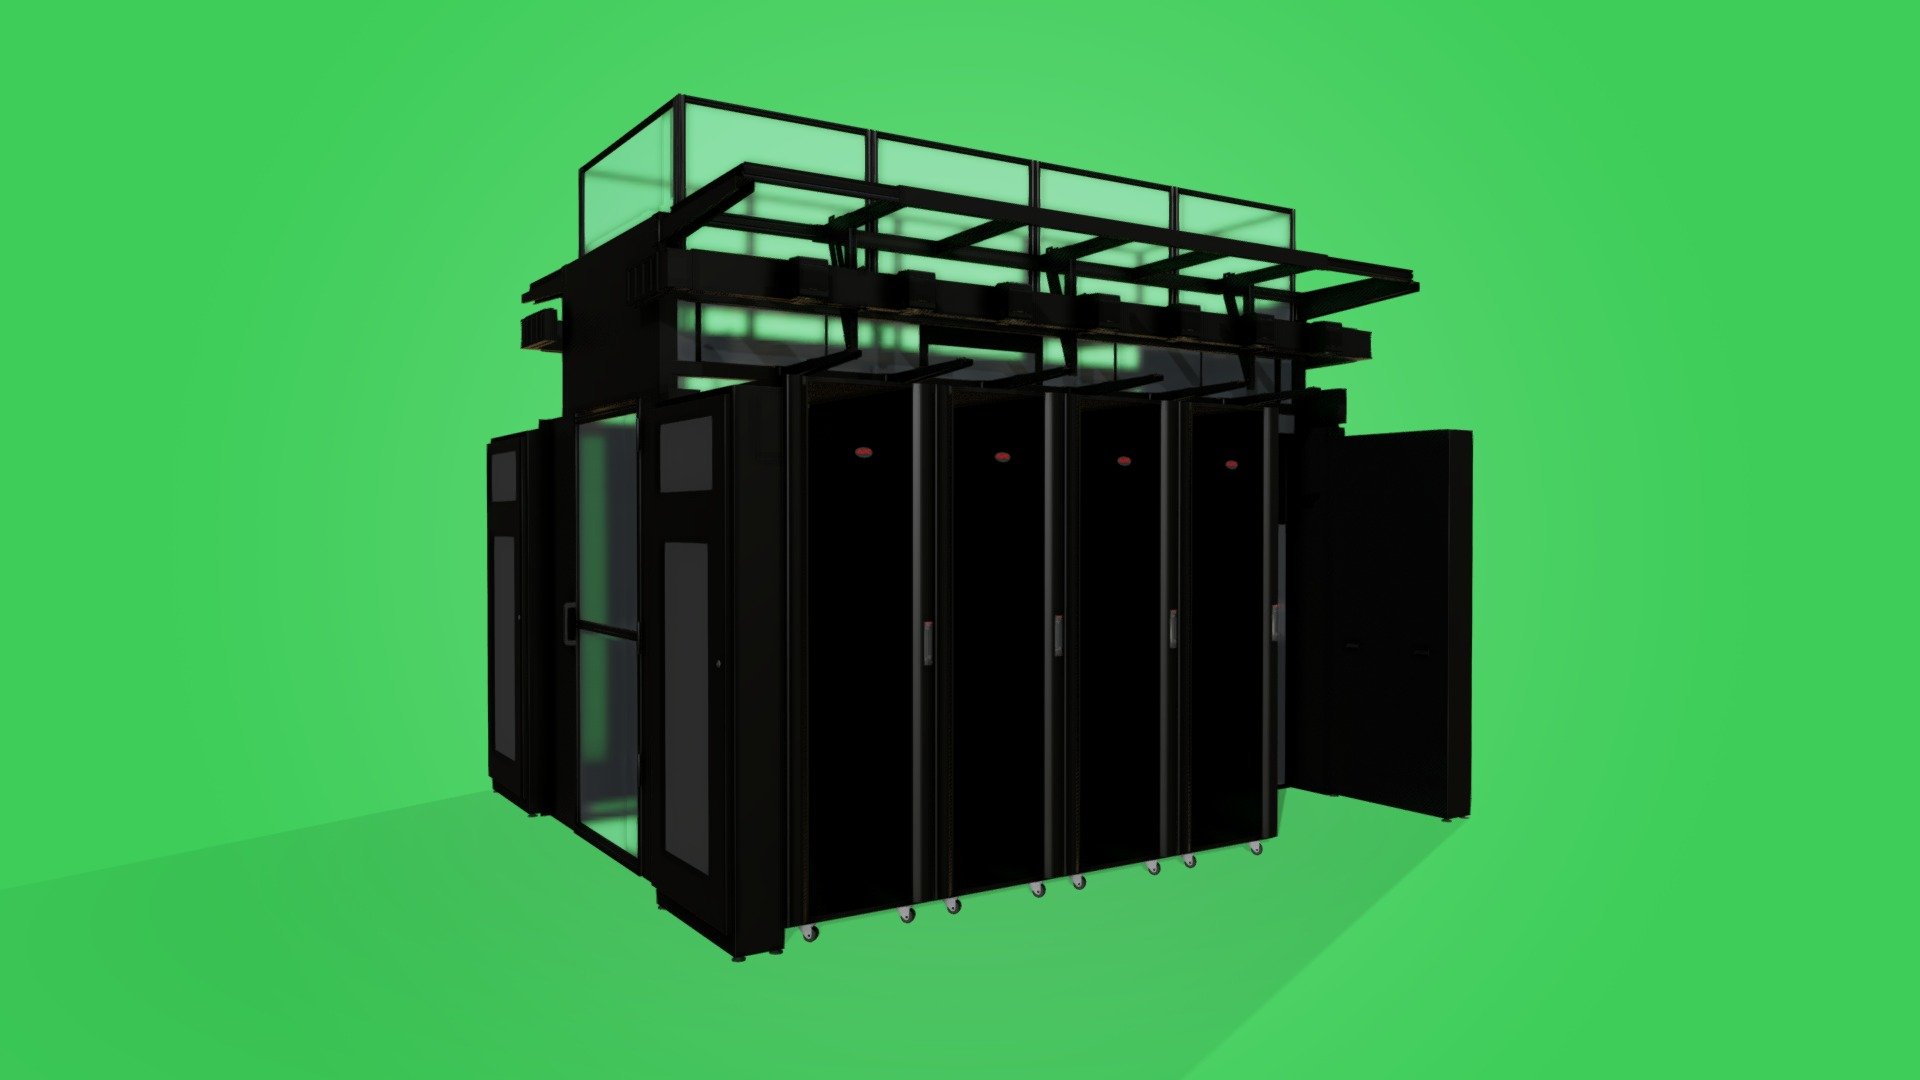 Meet the EcoStruxure Pod Data Center.

The EcoStruxure Pod Data Center is the only IT-Pod Frame solution available in the data center market space. With a flexible configuration, it supports all of today’s rack types and can reduce CapEx Costs by up to 15 percent.

Learn more at: https://www.schneider-electric.com/en/work/solutions/for-business/data-centers-and-networks/hyperpod/ - EcoStruxure Pod Data Center - 3D model by Schneider Electric 3d model